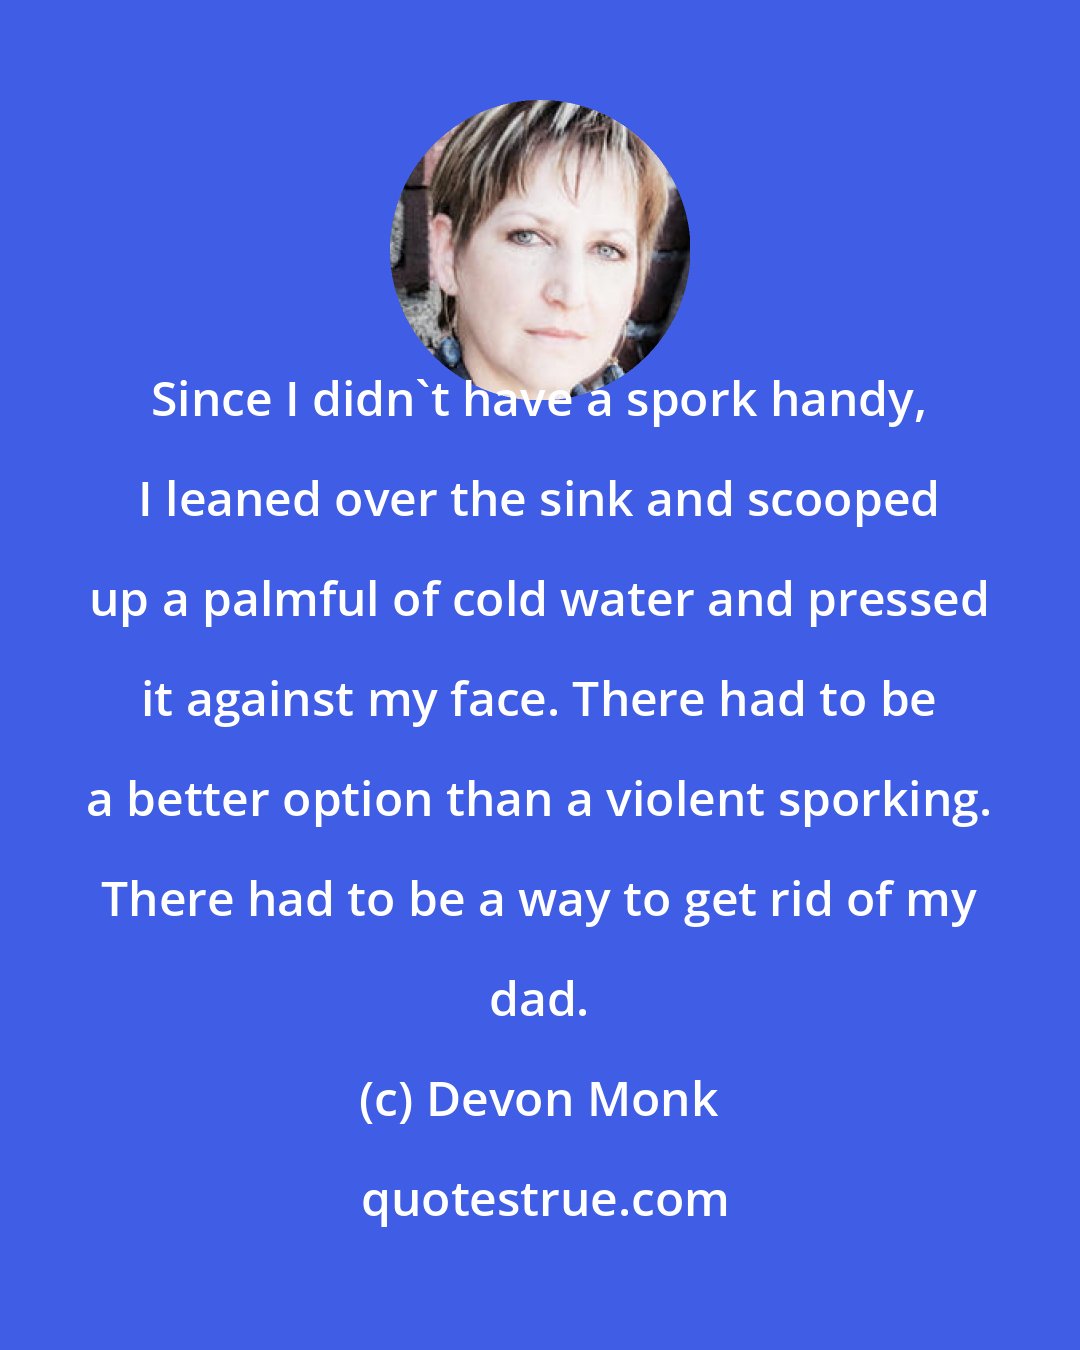 Devon Monk: Since I didn't have a spork handy, I leaned over the sink and scooped up a palmful of cold water and pressed it against my face. There had to be a better option than a violent sporking. There had to be a way to get rid of my dad.